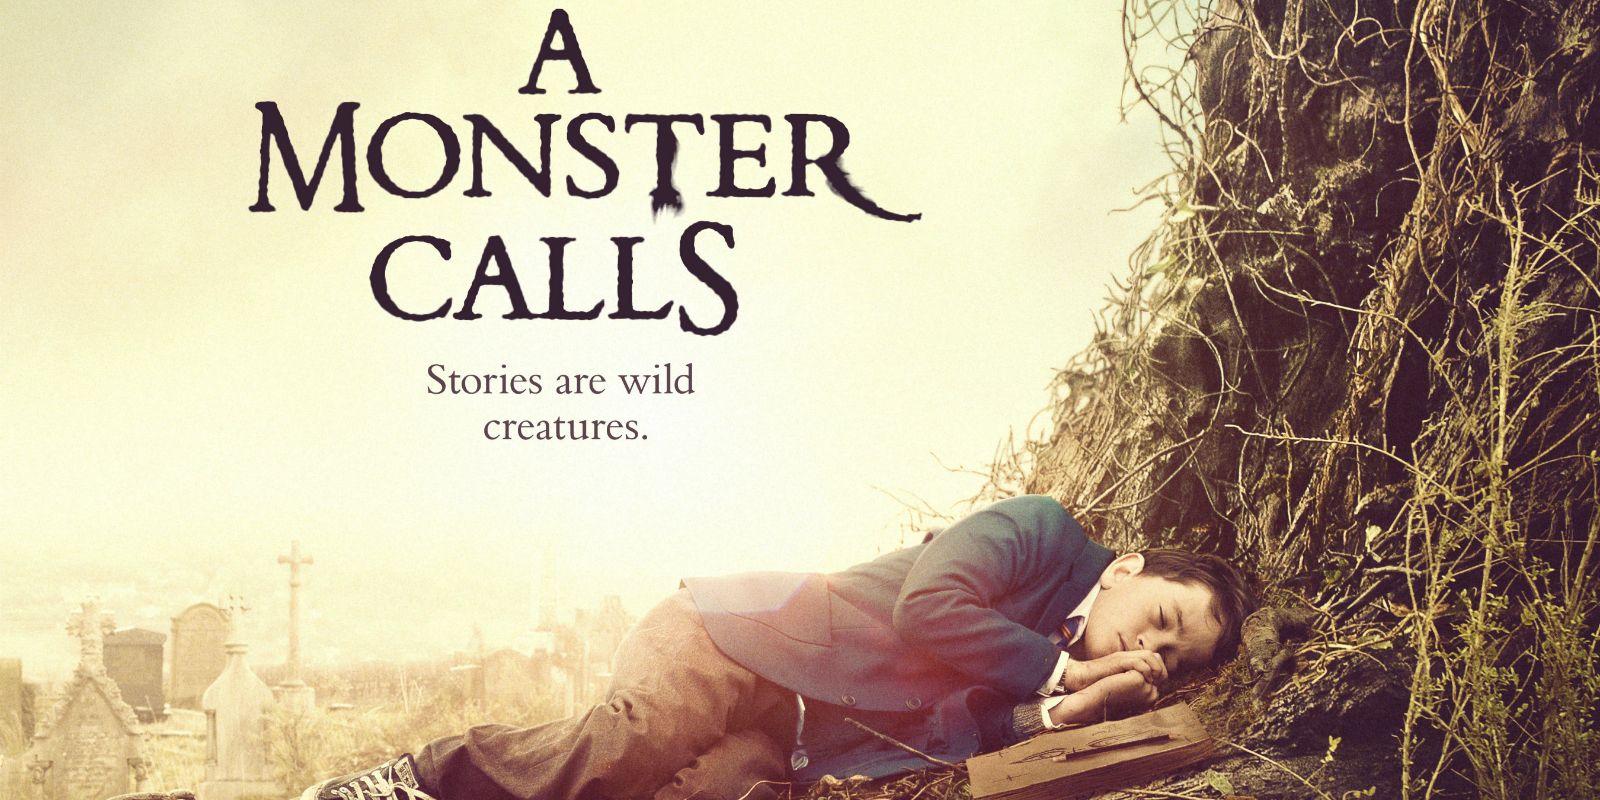 A Monster Calls Early Reviews: A Beautiful, Tear-Jerking Fantasy Tale